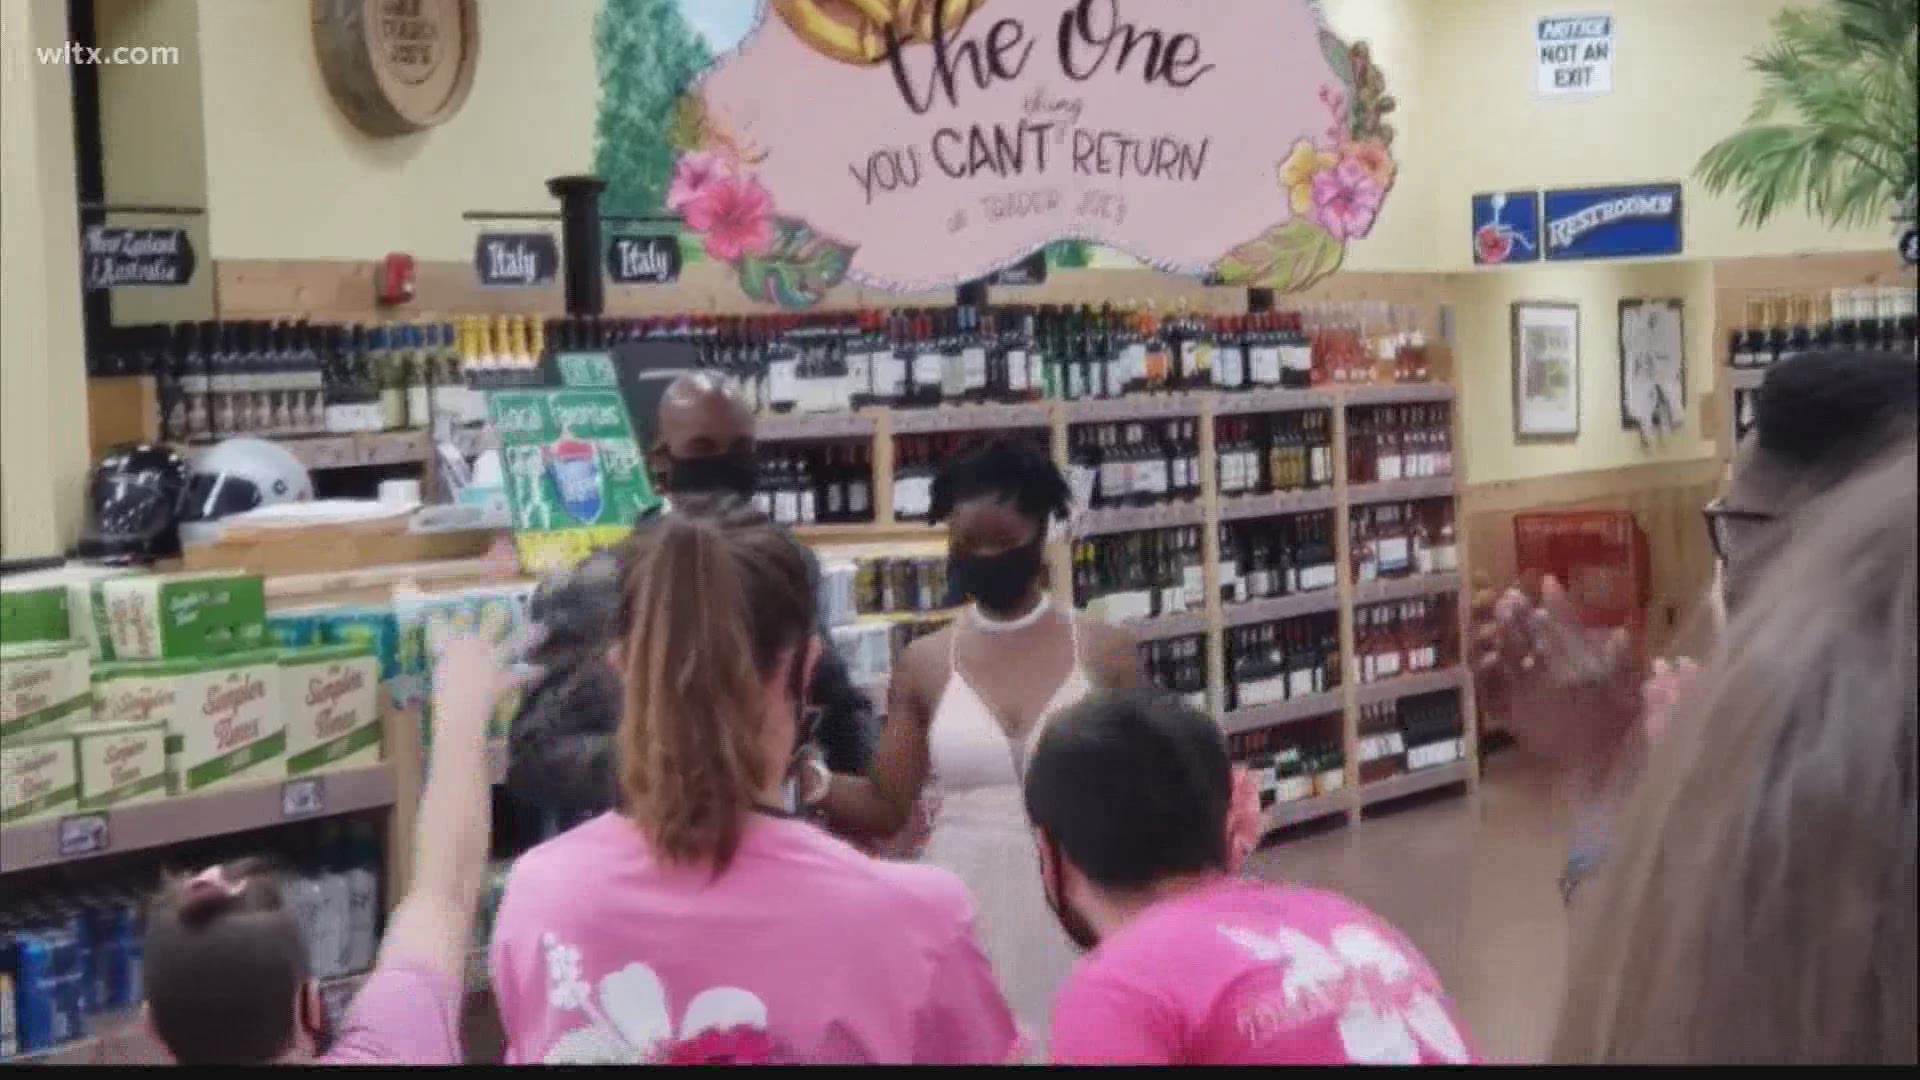 A Columbia couple turned a grocery aisle into the wedding aisle. The two actually met at the grocery store and wanted to pay tribute to that.